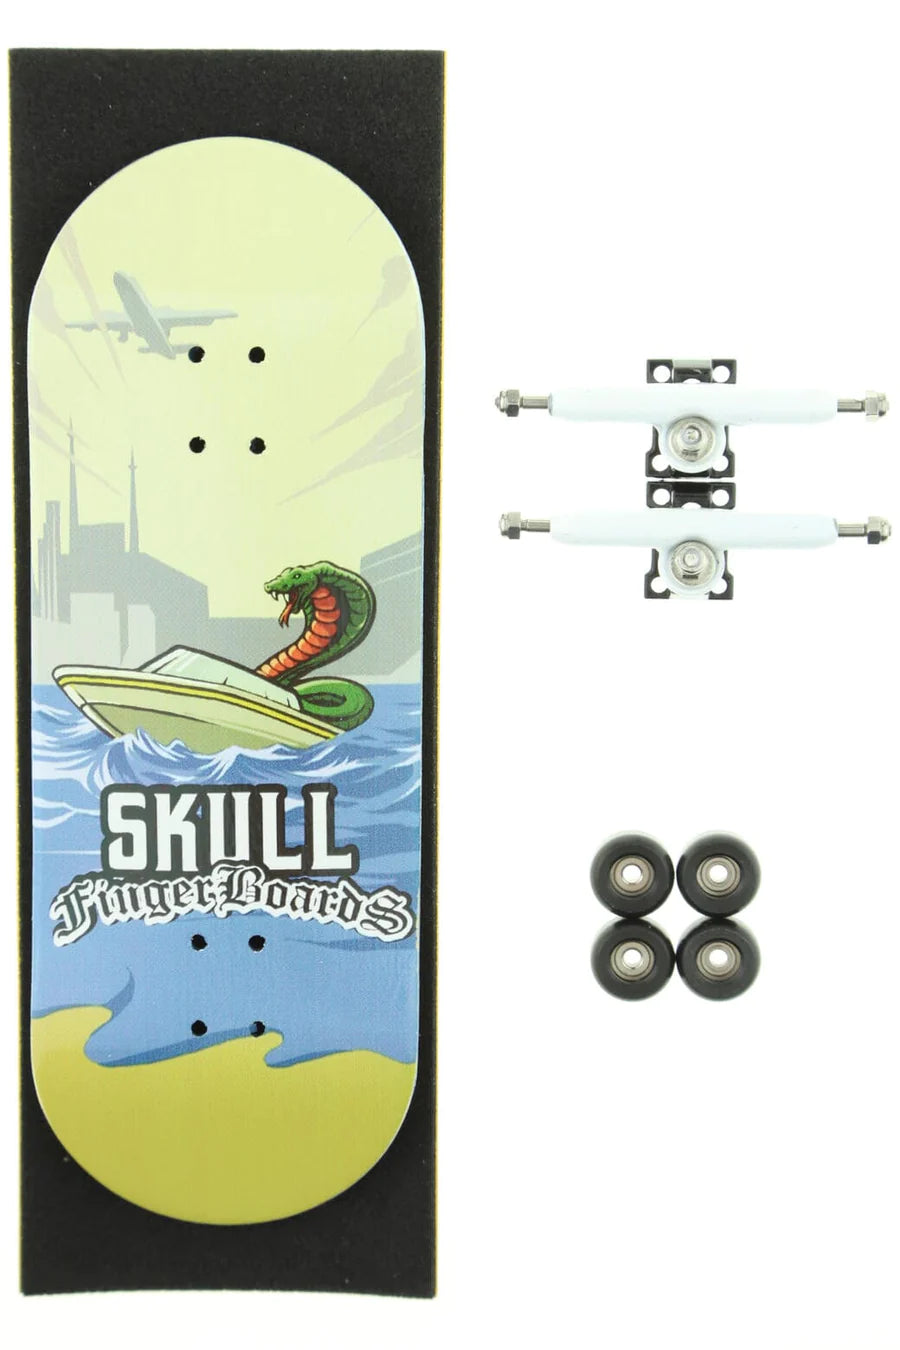 Skull Complete - City Limits 34mm (Pro Truck Edition)